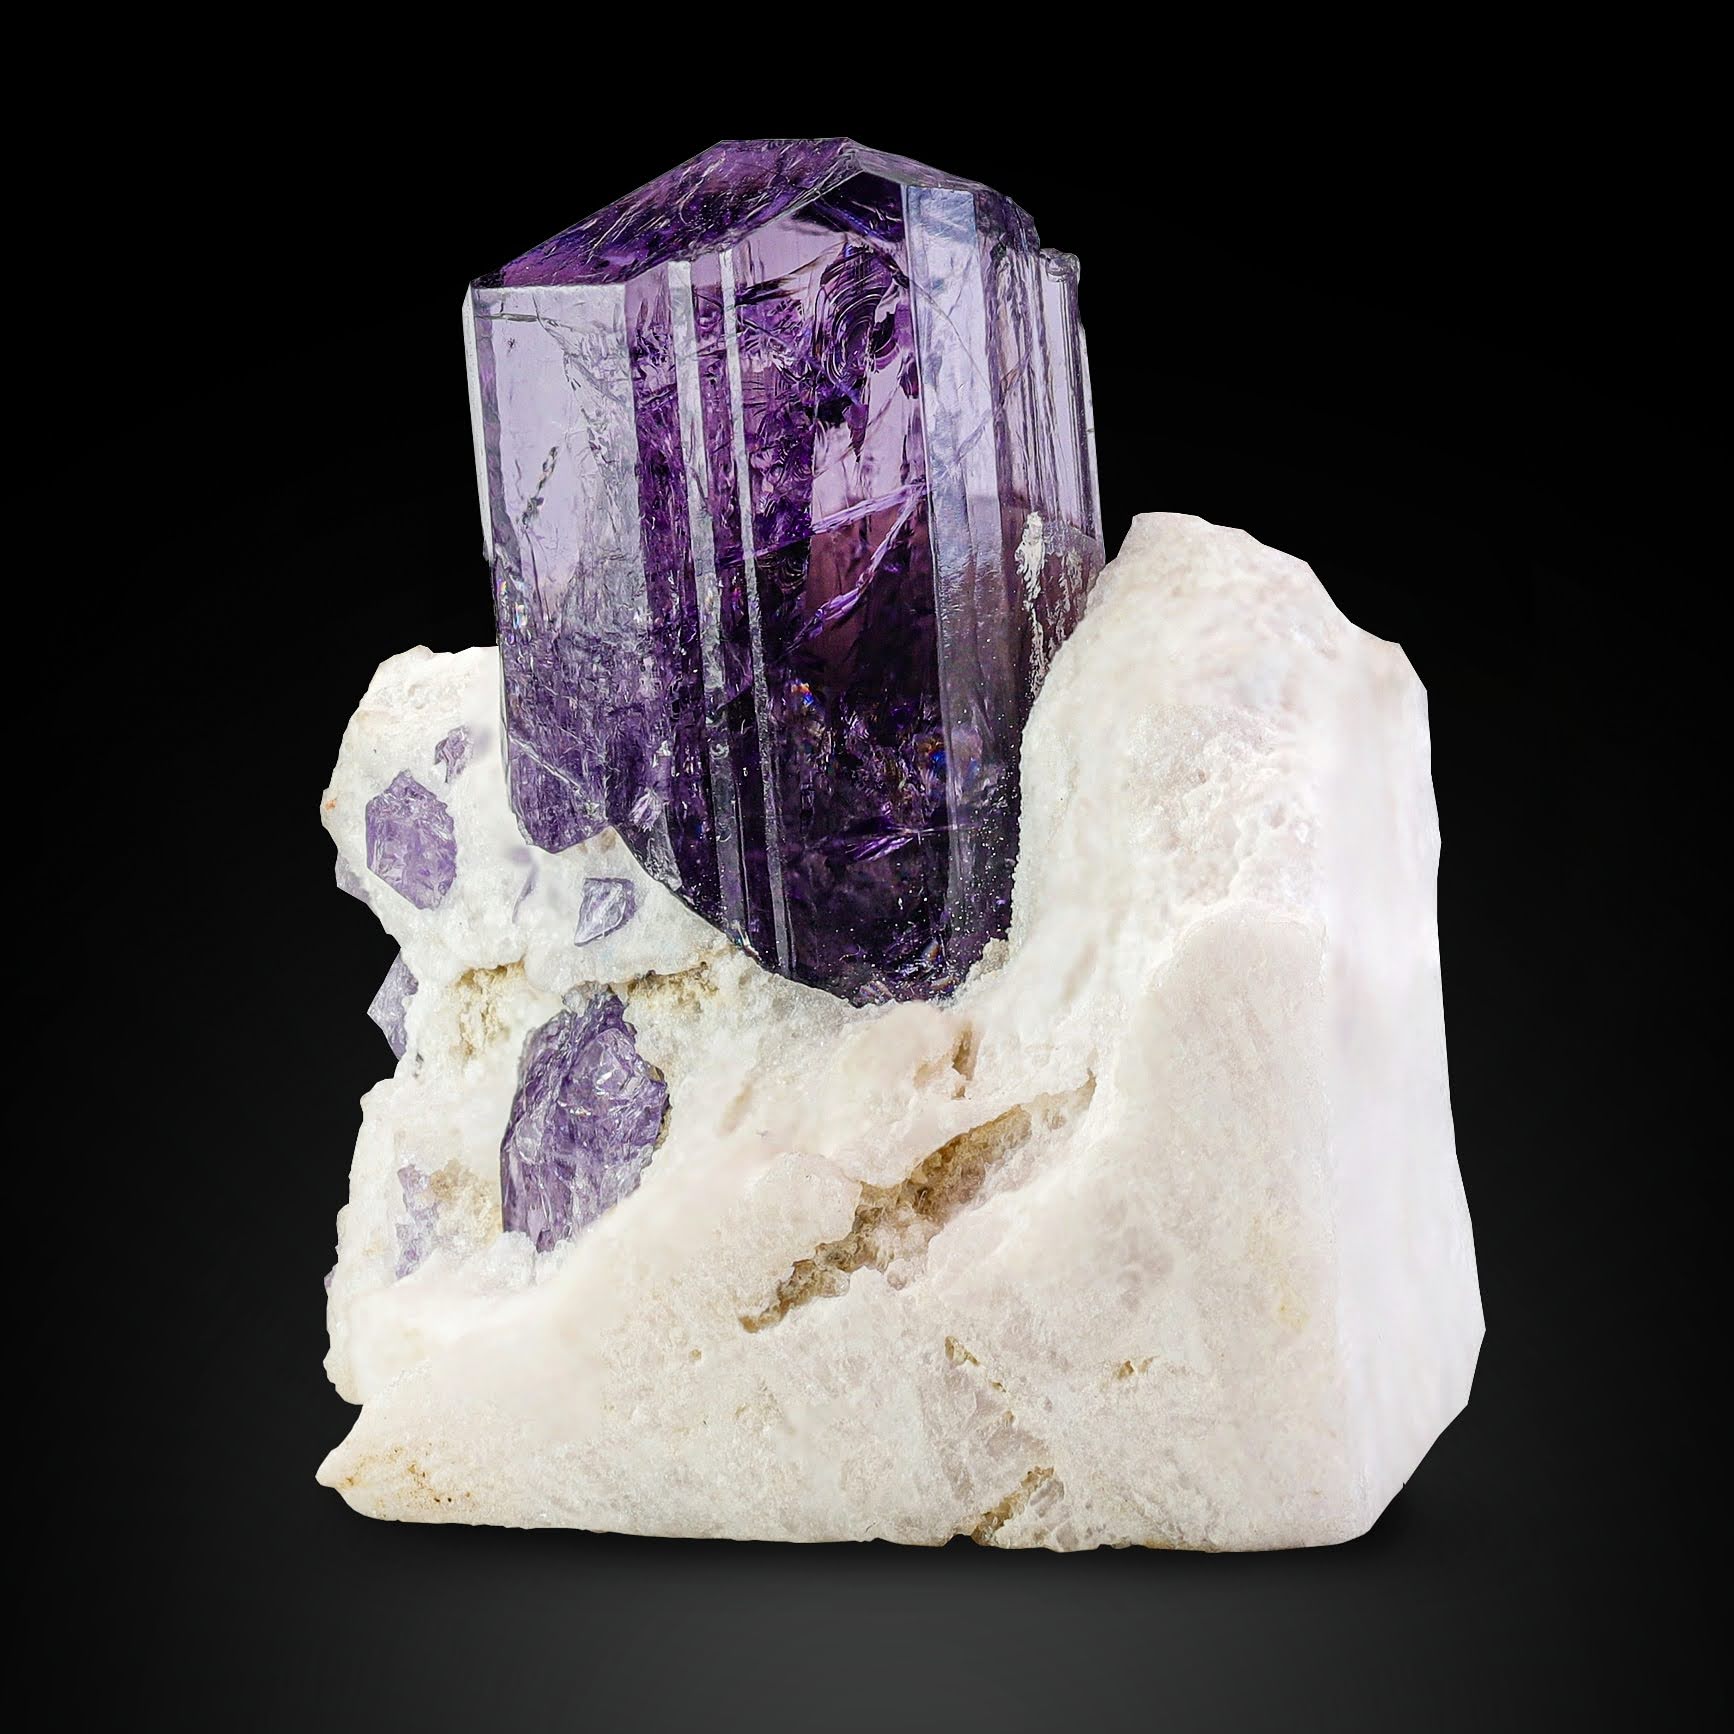 tabular gem vibrant purple color Scapolite crystal on Calcite from Afghanistan